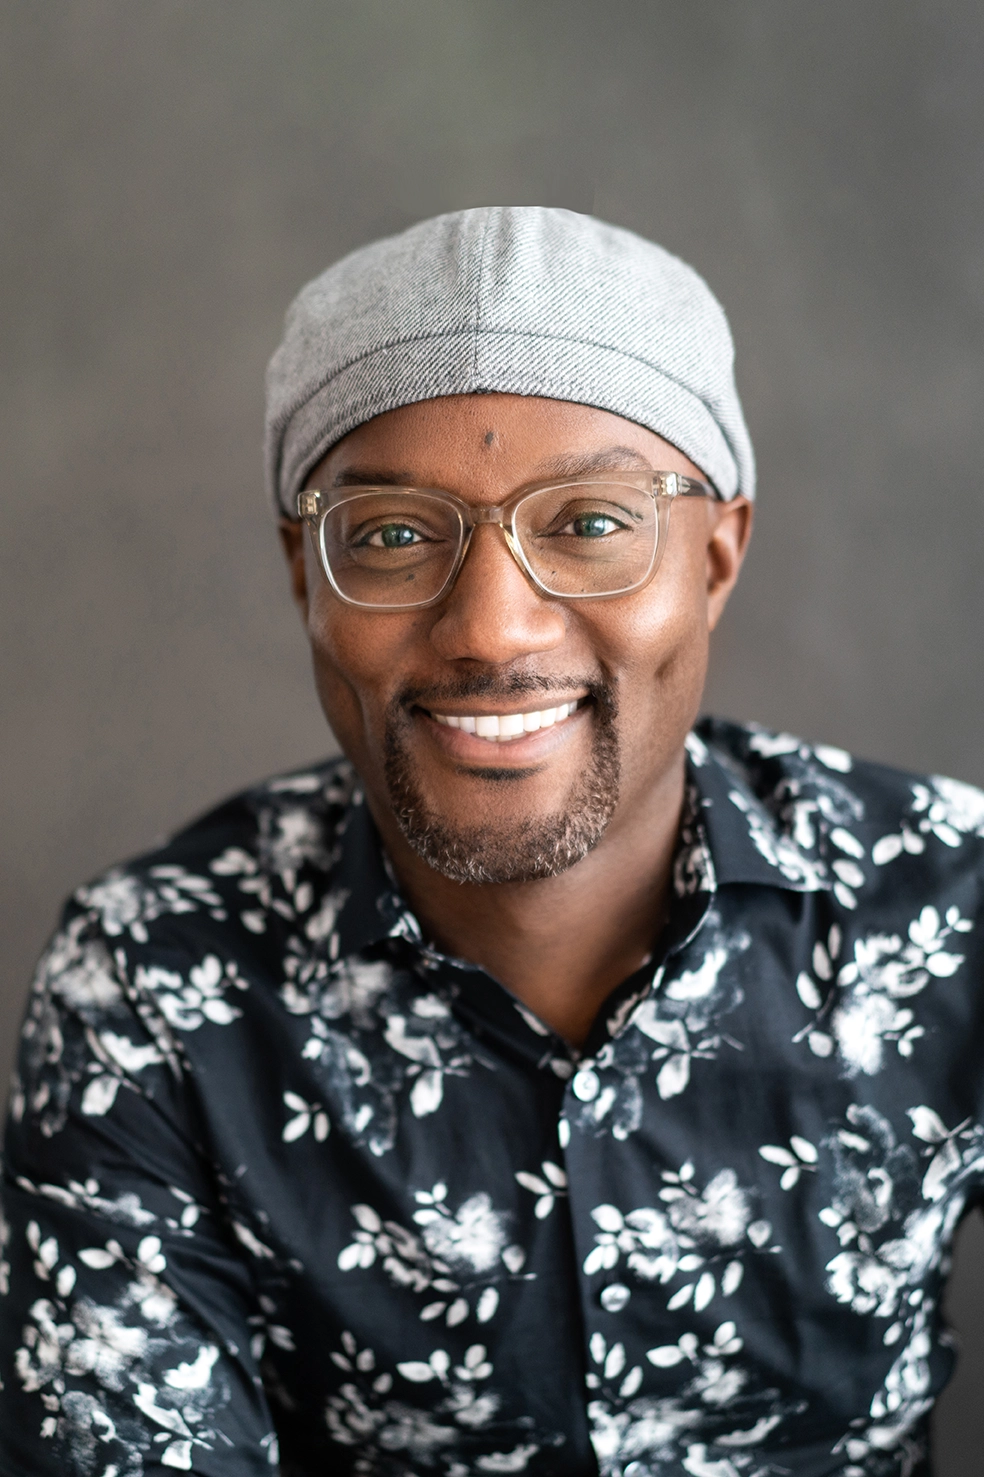 Man-with-glasses-and-hat-in-floral-button-up-shirt-smiling